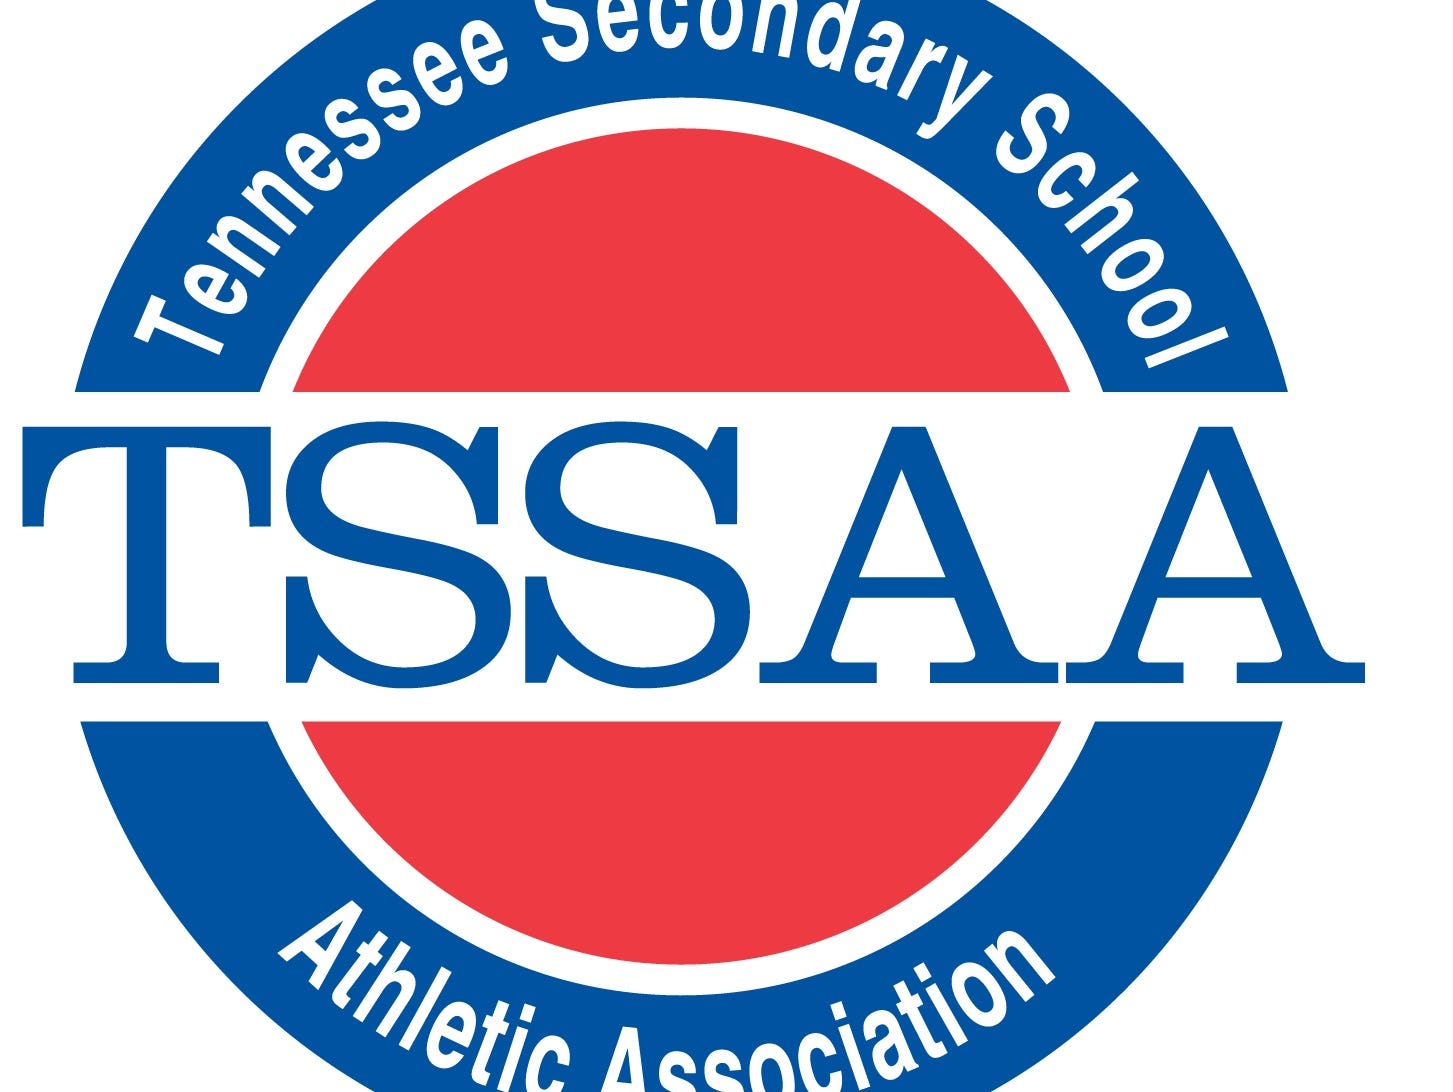 The TSSAA announced the 2014 Tennessee Titans Mr. Football Finalists on Wednesday.